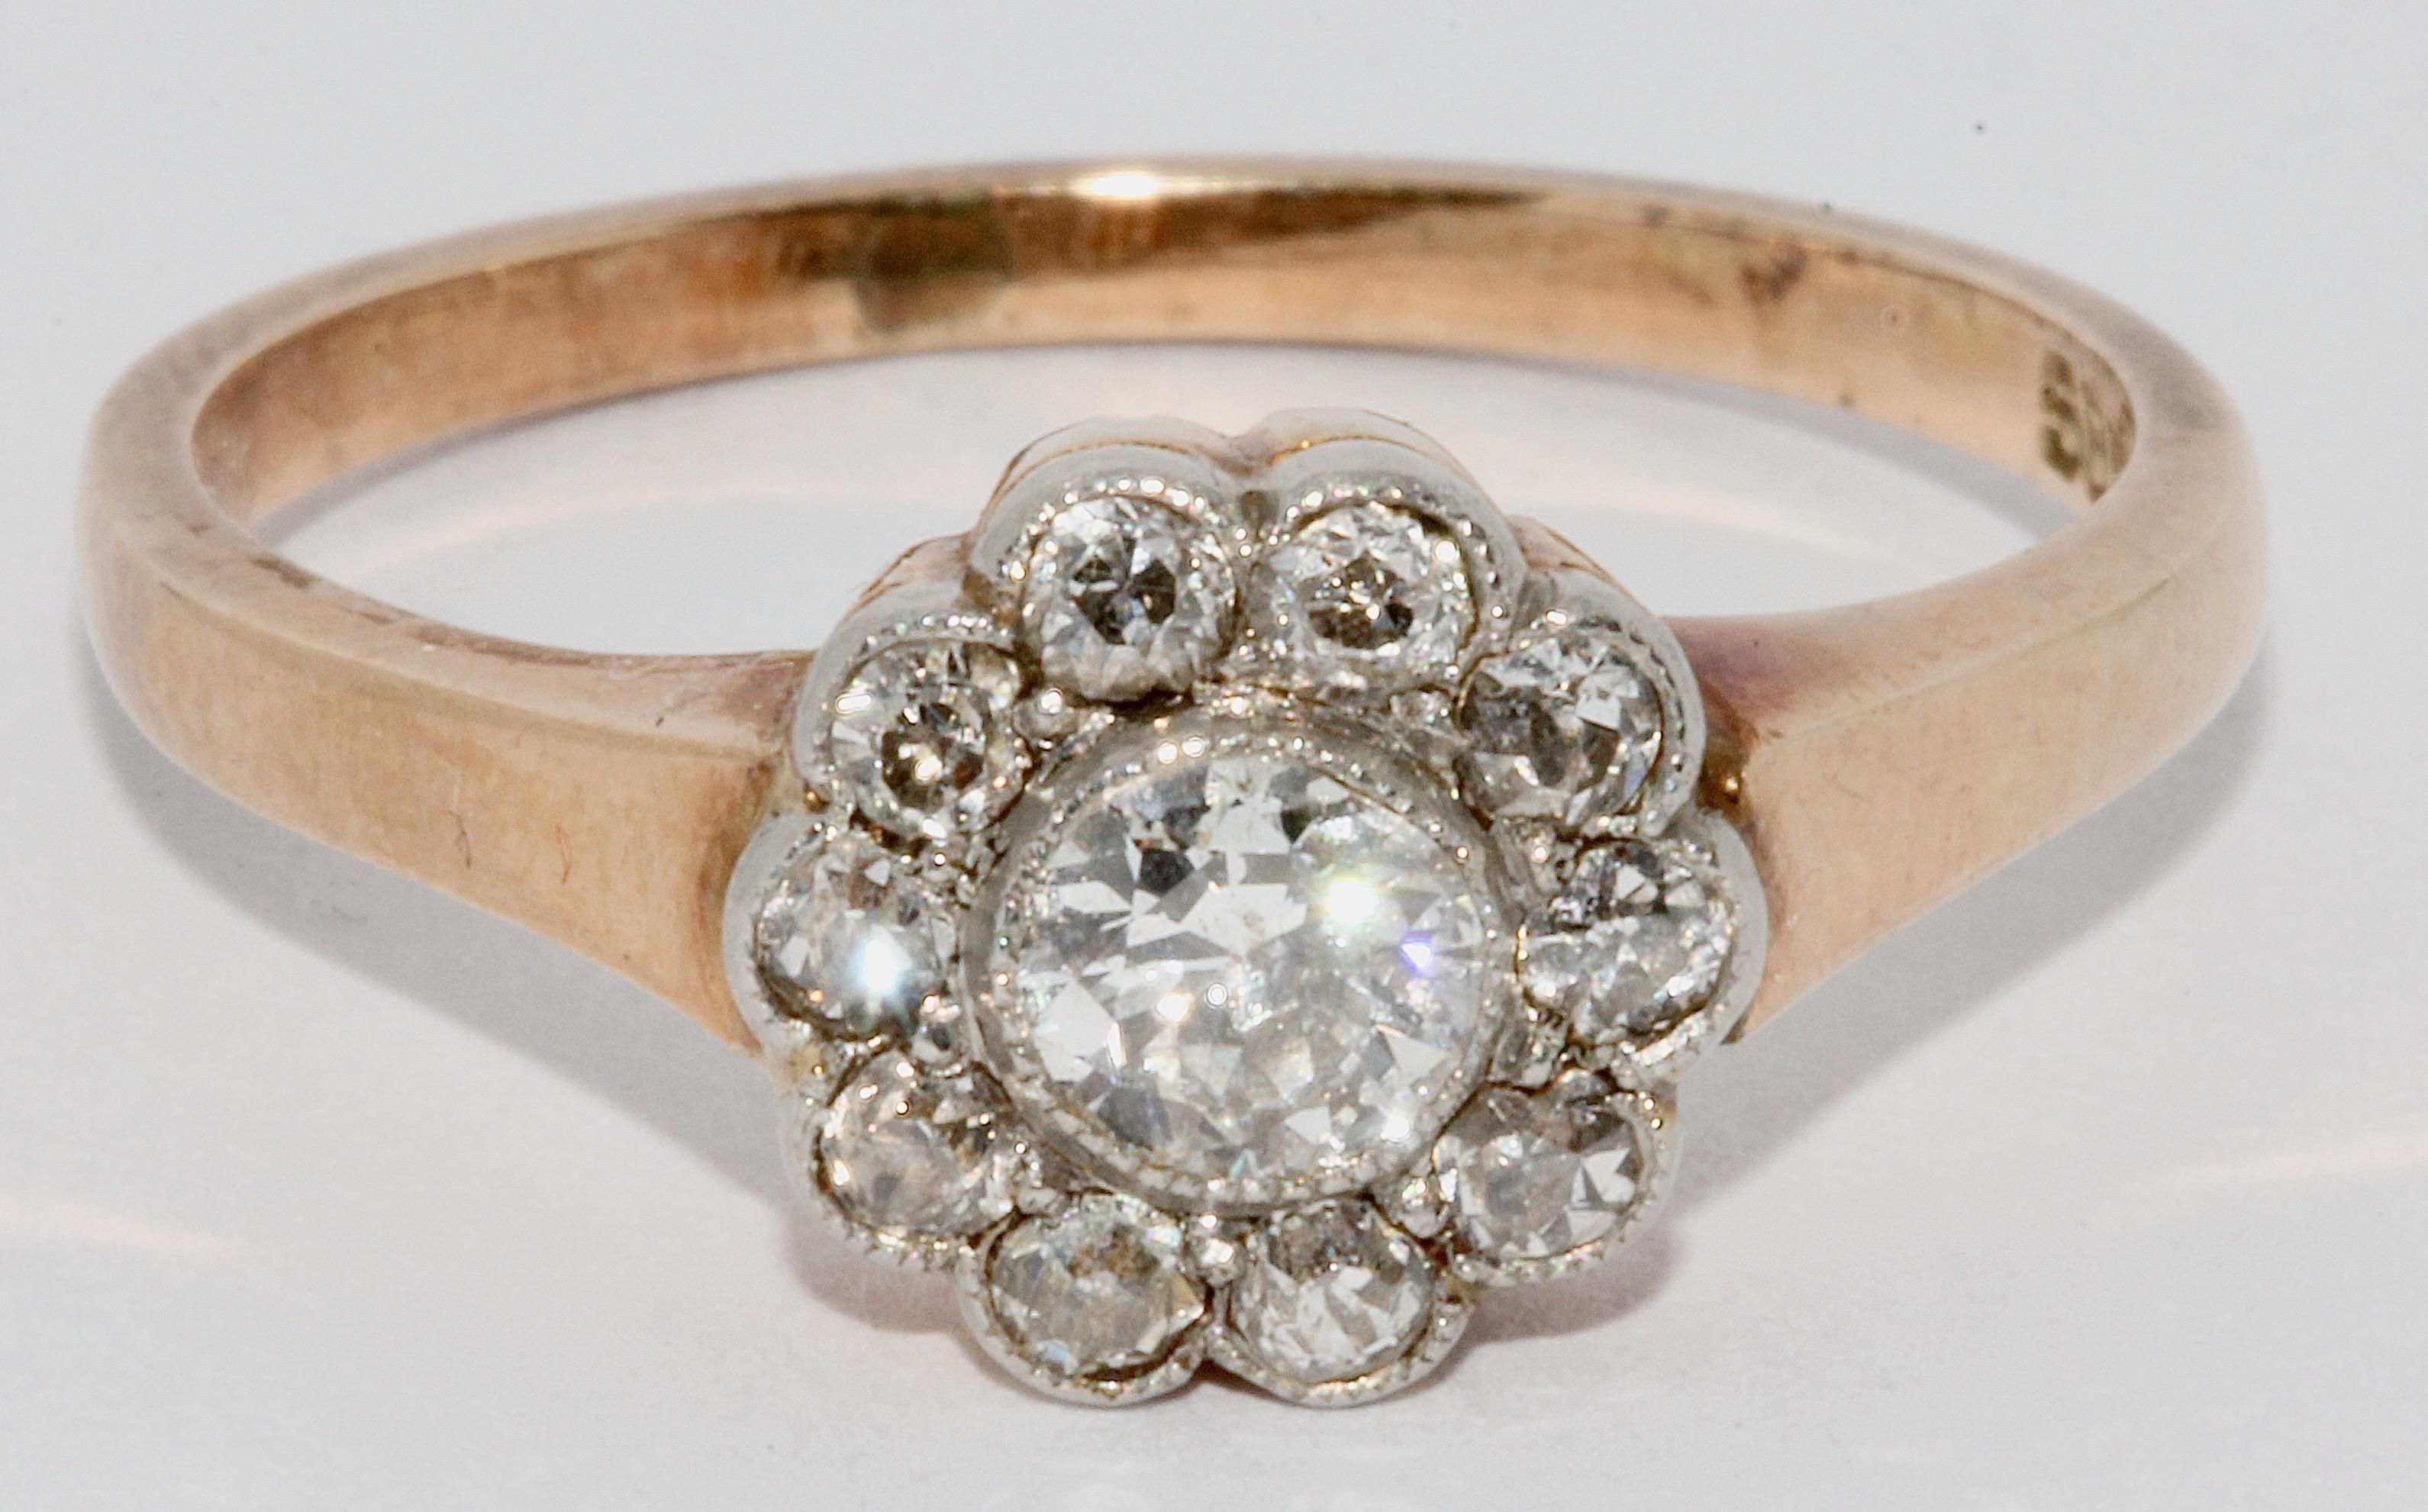 Charming antique old cut diamond ring, 14 carat gold.

Ring size can be adjusted on request.

Including certificate of authenticity.